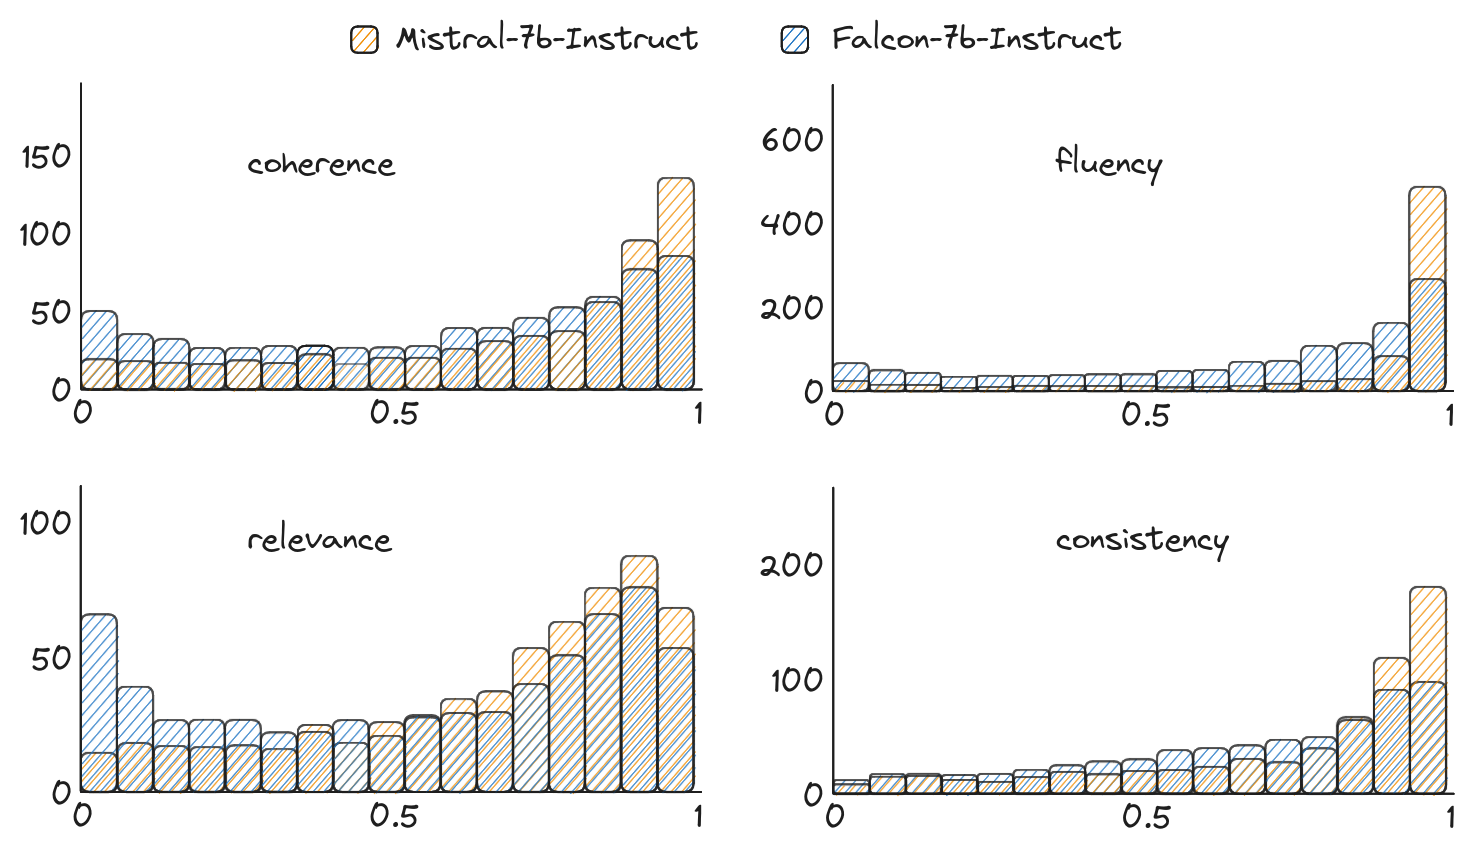 UniEval evaluation of Mistral and Falcon with distribution of scores of 3600 queries. Higher score is better.